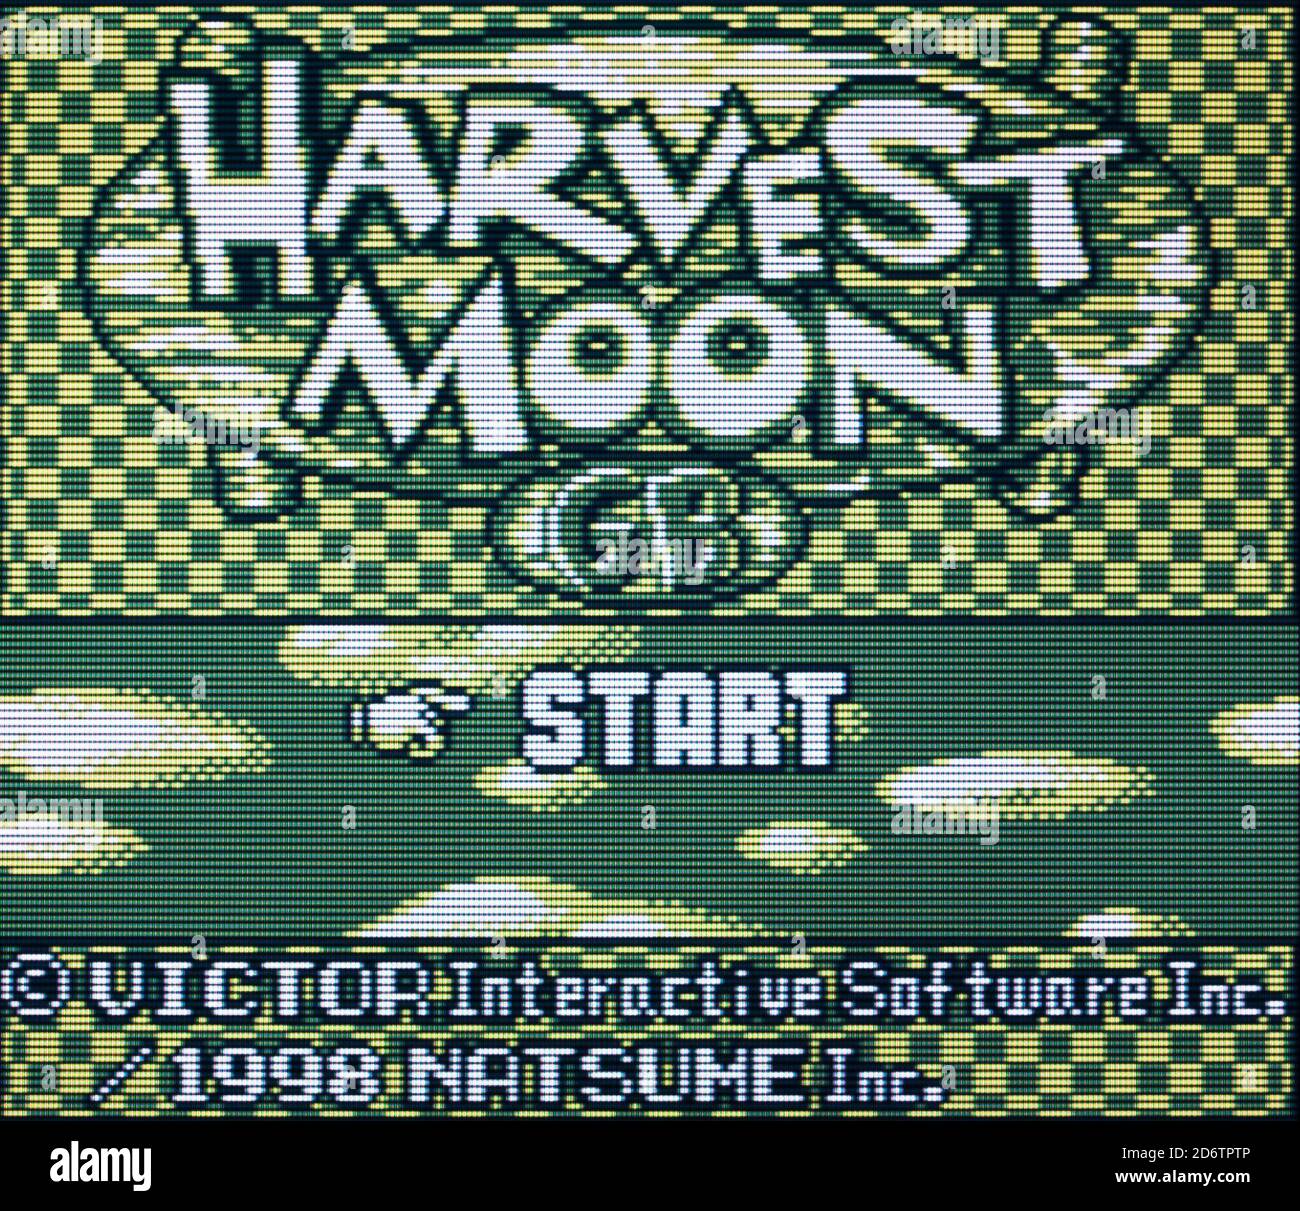 Harvest Moon GB - Nintendo Gameboy Videogame - Editorial use only Stock Photo